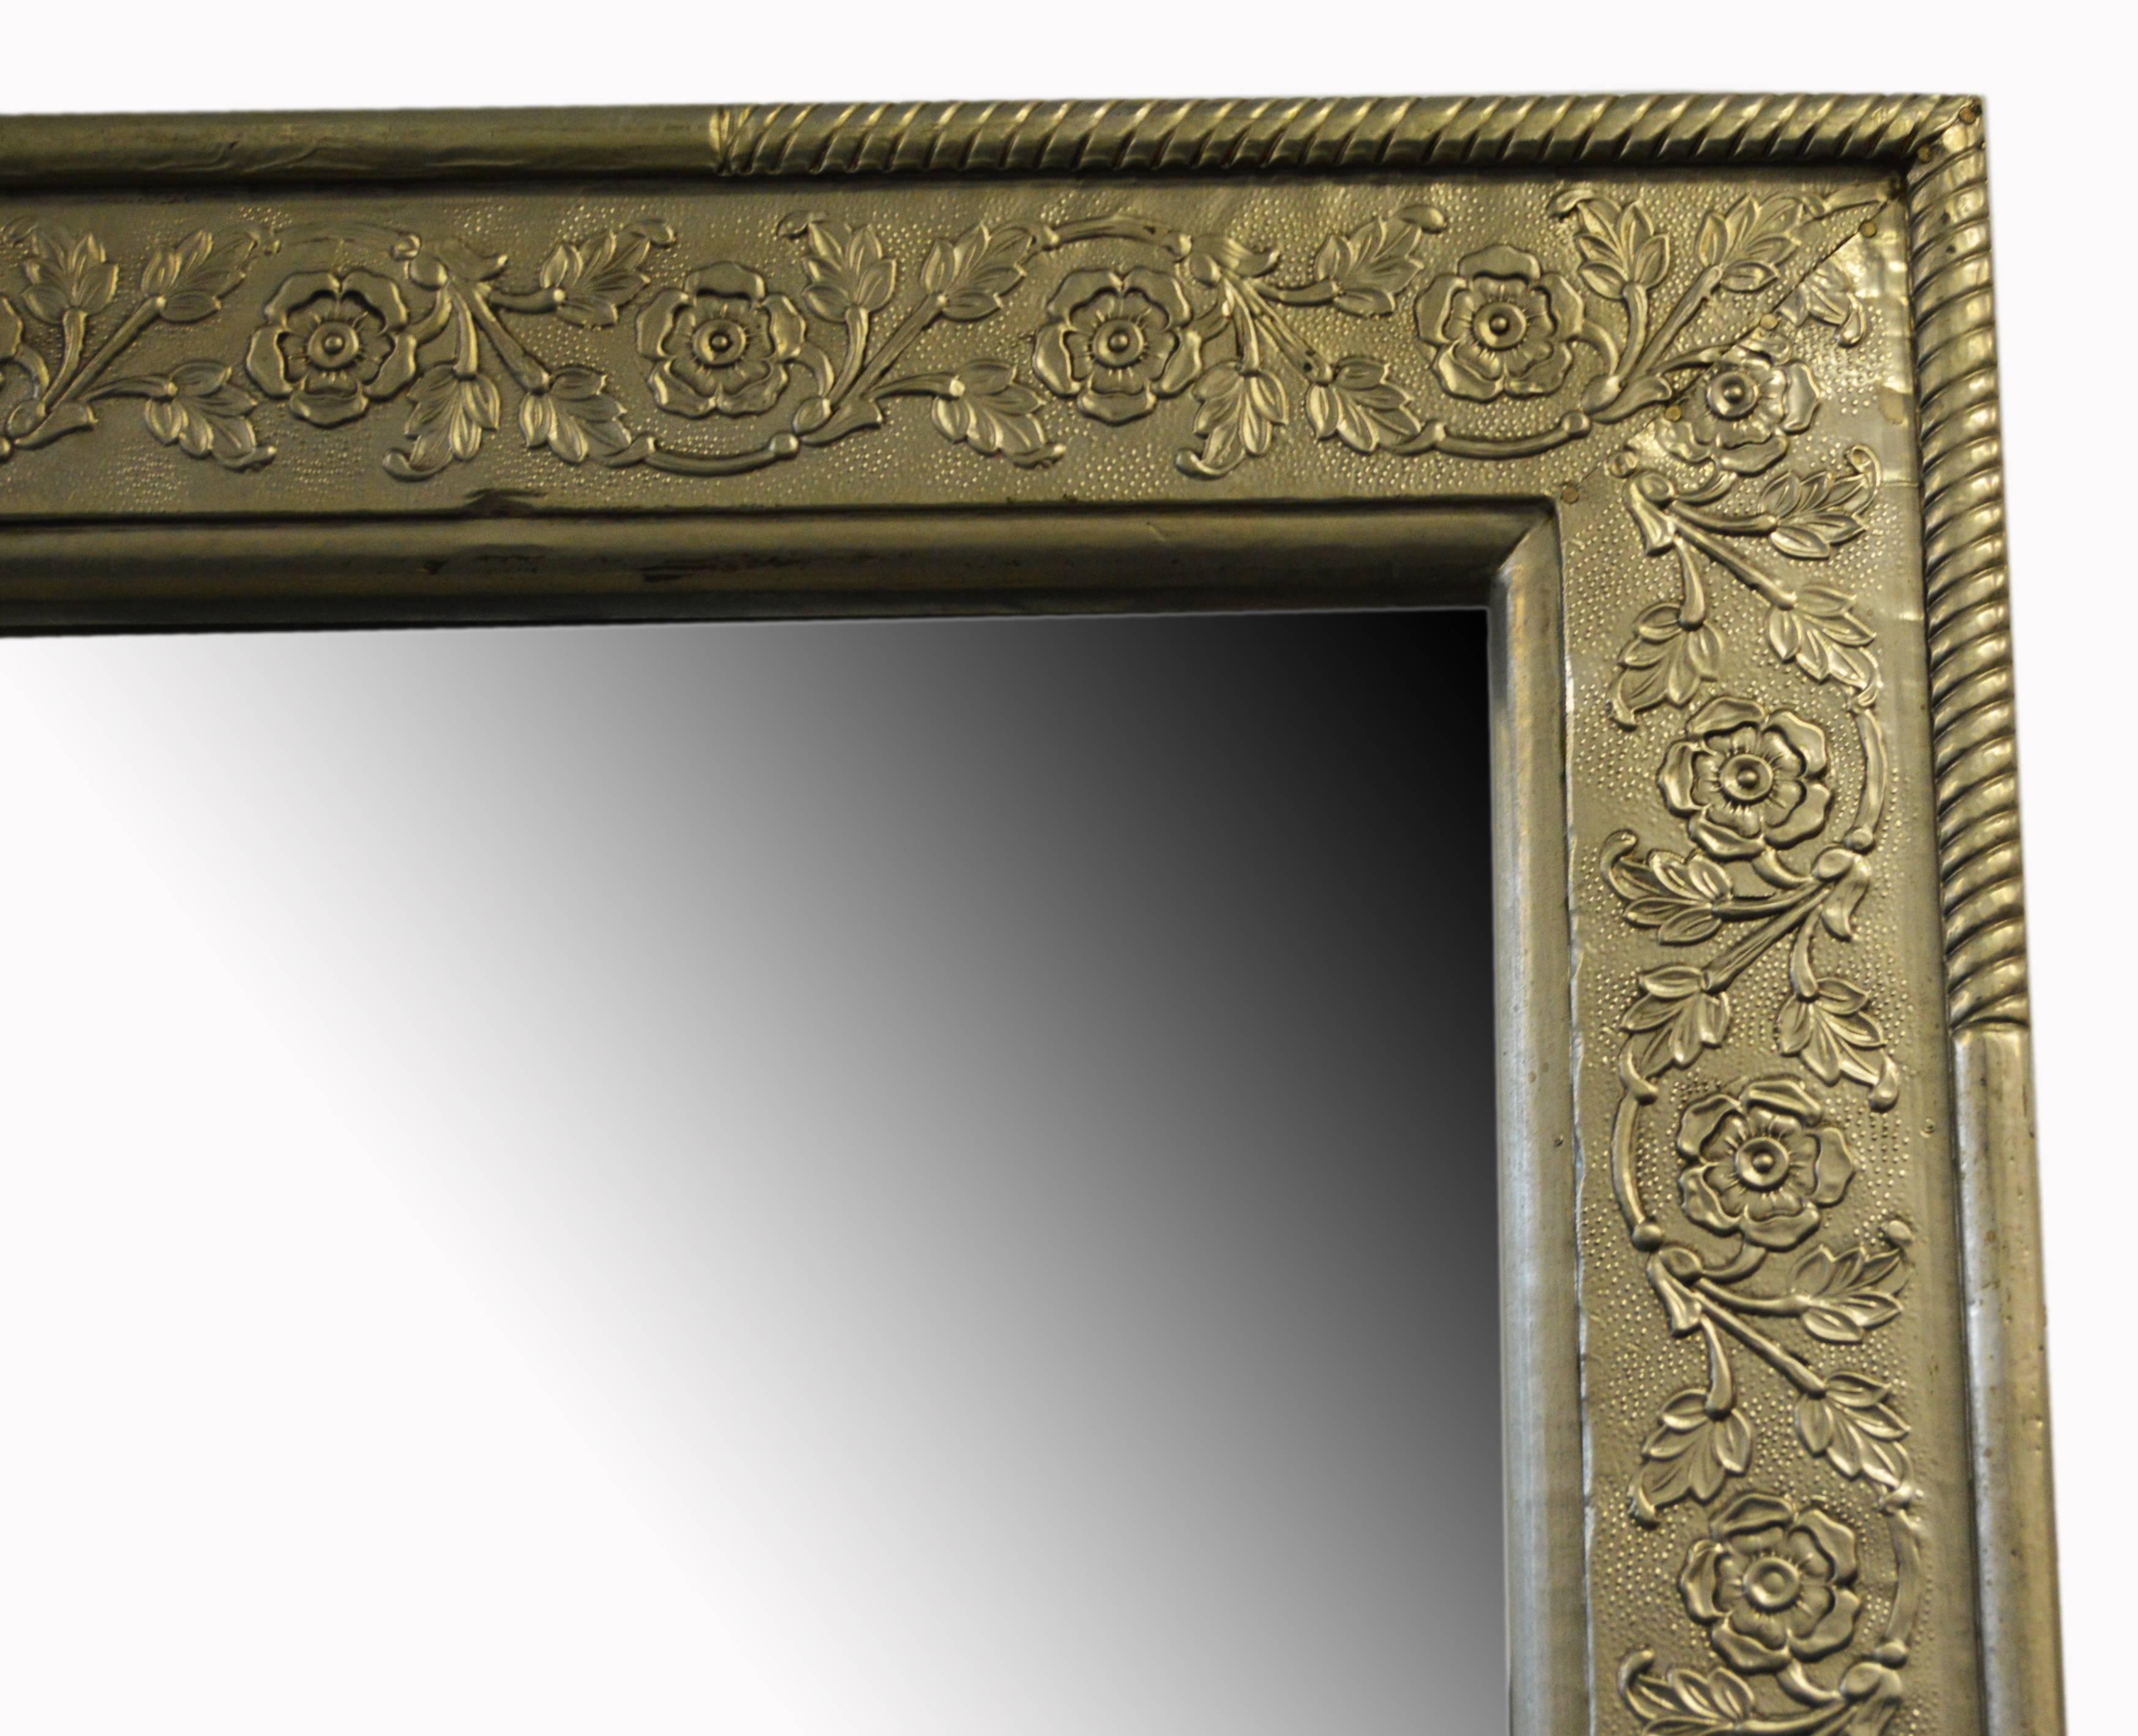 An antique 19th century Indian silver-plated rectangular mirror, hand-hammered brass over wood. This Indian silver-plated mirror features a rectangular frame, adorned with an exquisite décor of arabesques of flowers, whose sinuous arrangement gently